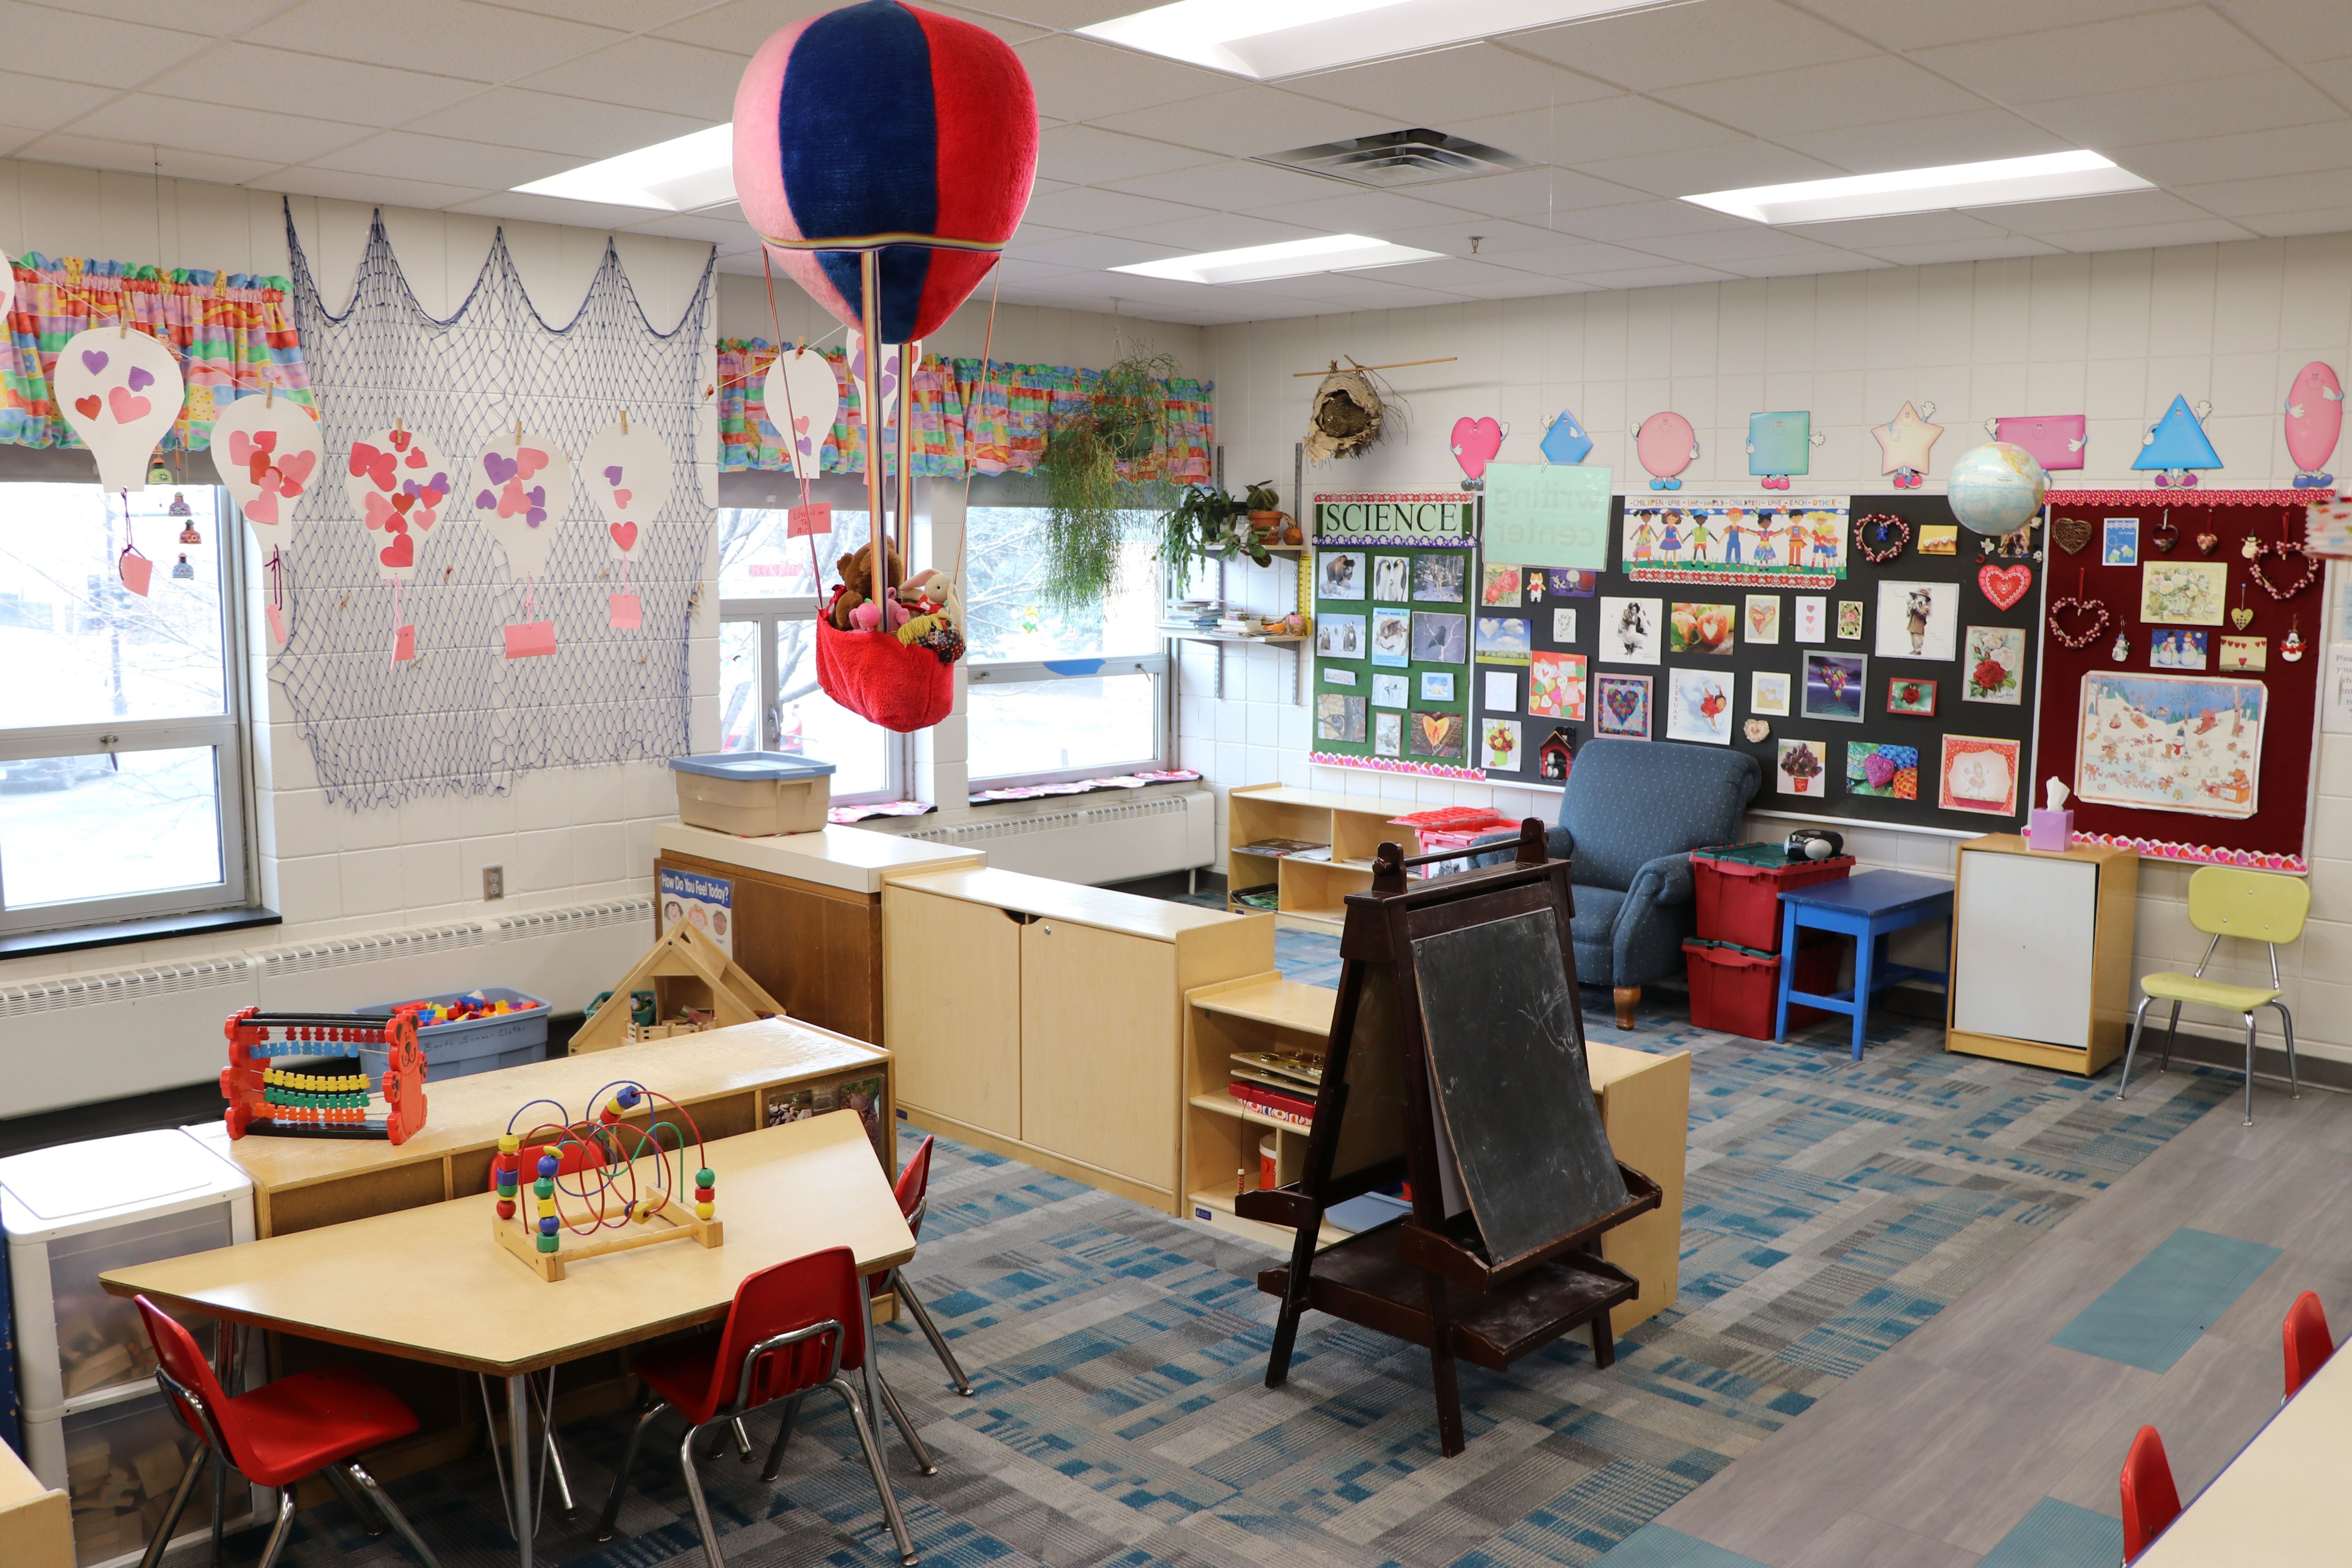 Check out our classrooms!